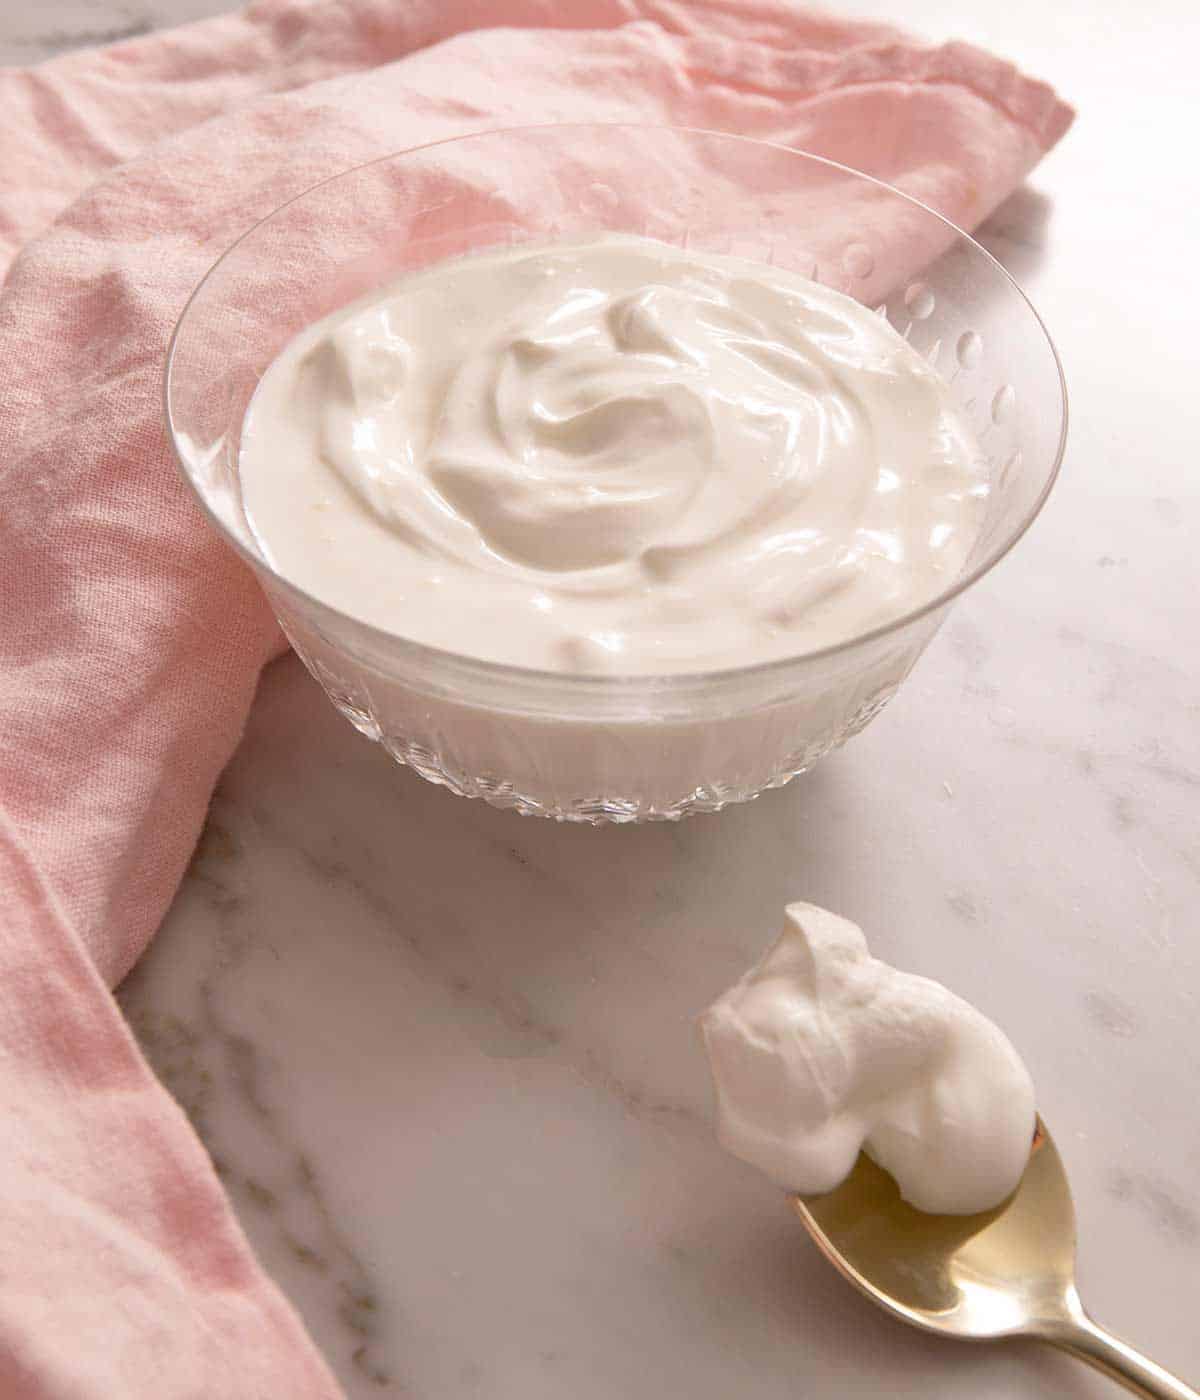 A bowl of homemade sour cream sitting on a marble work surface